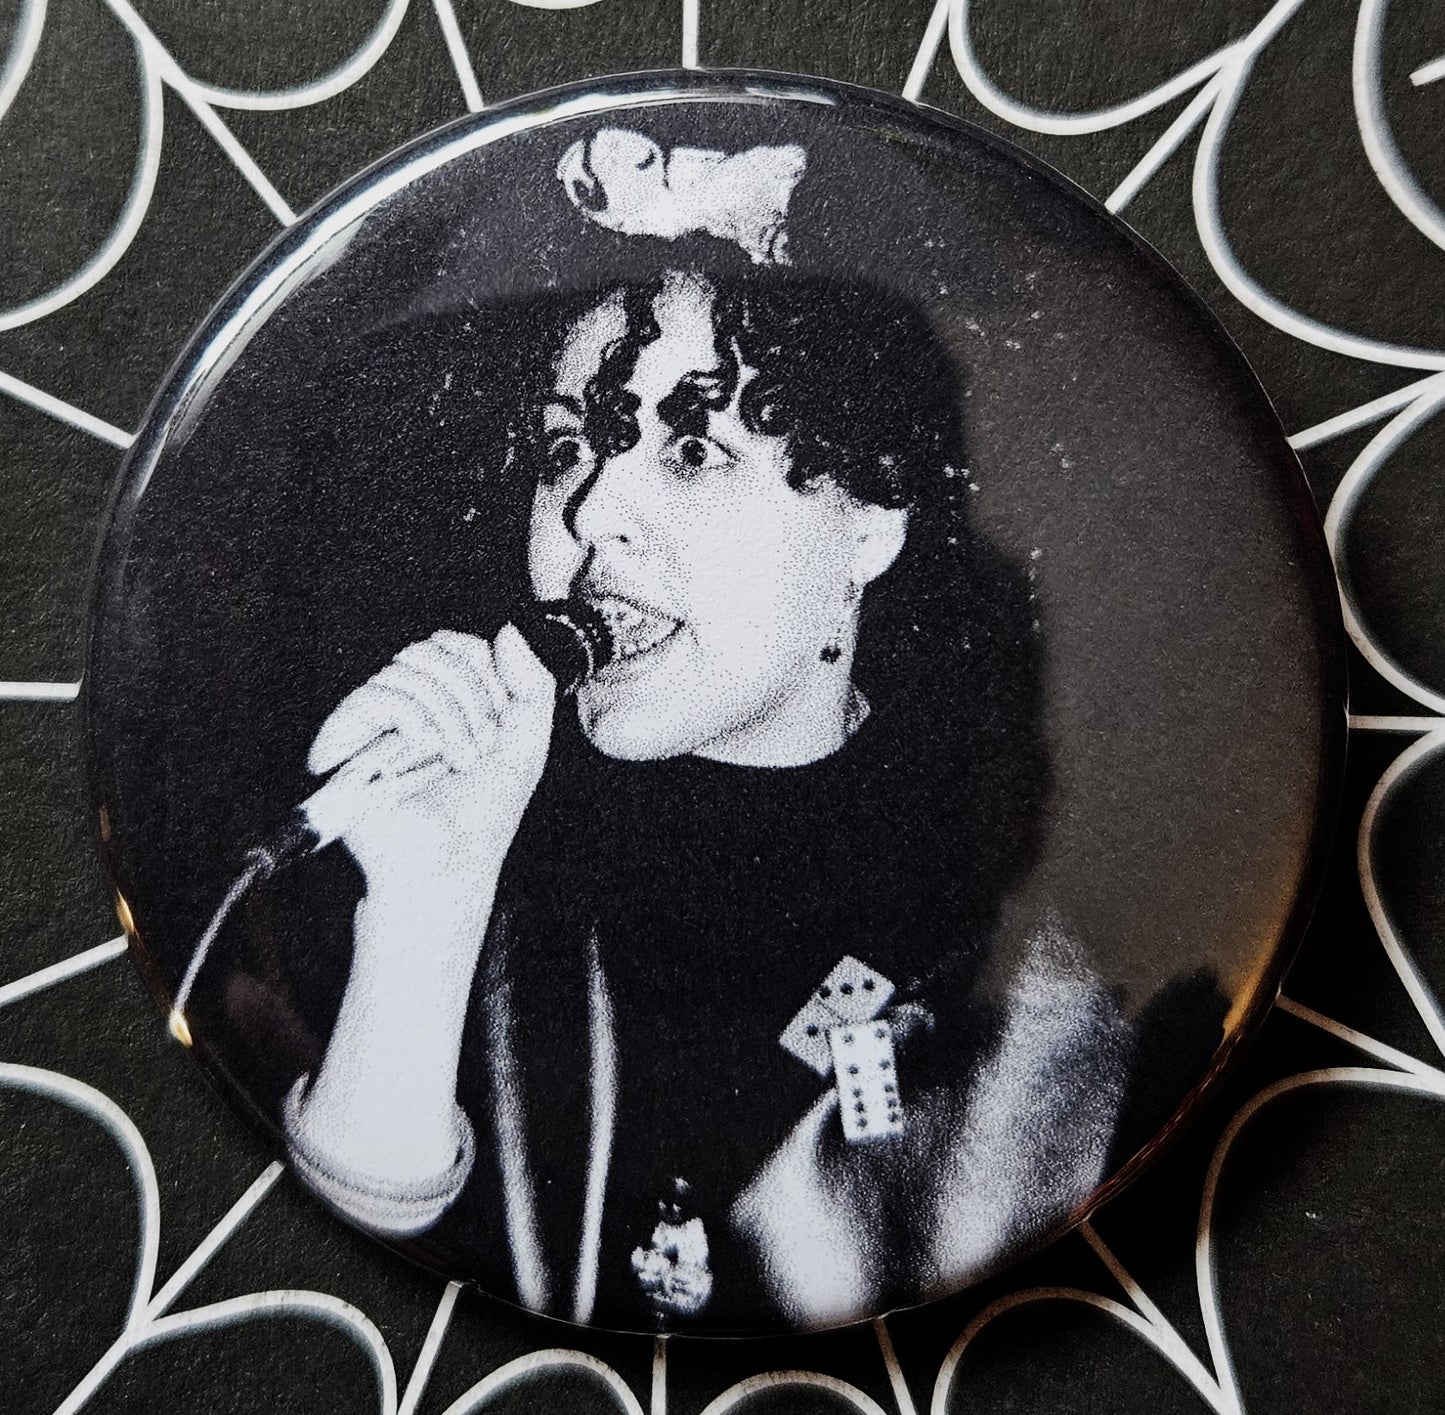 Poly Styrene pinback Buttons & Bottle Openers.